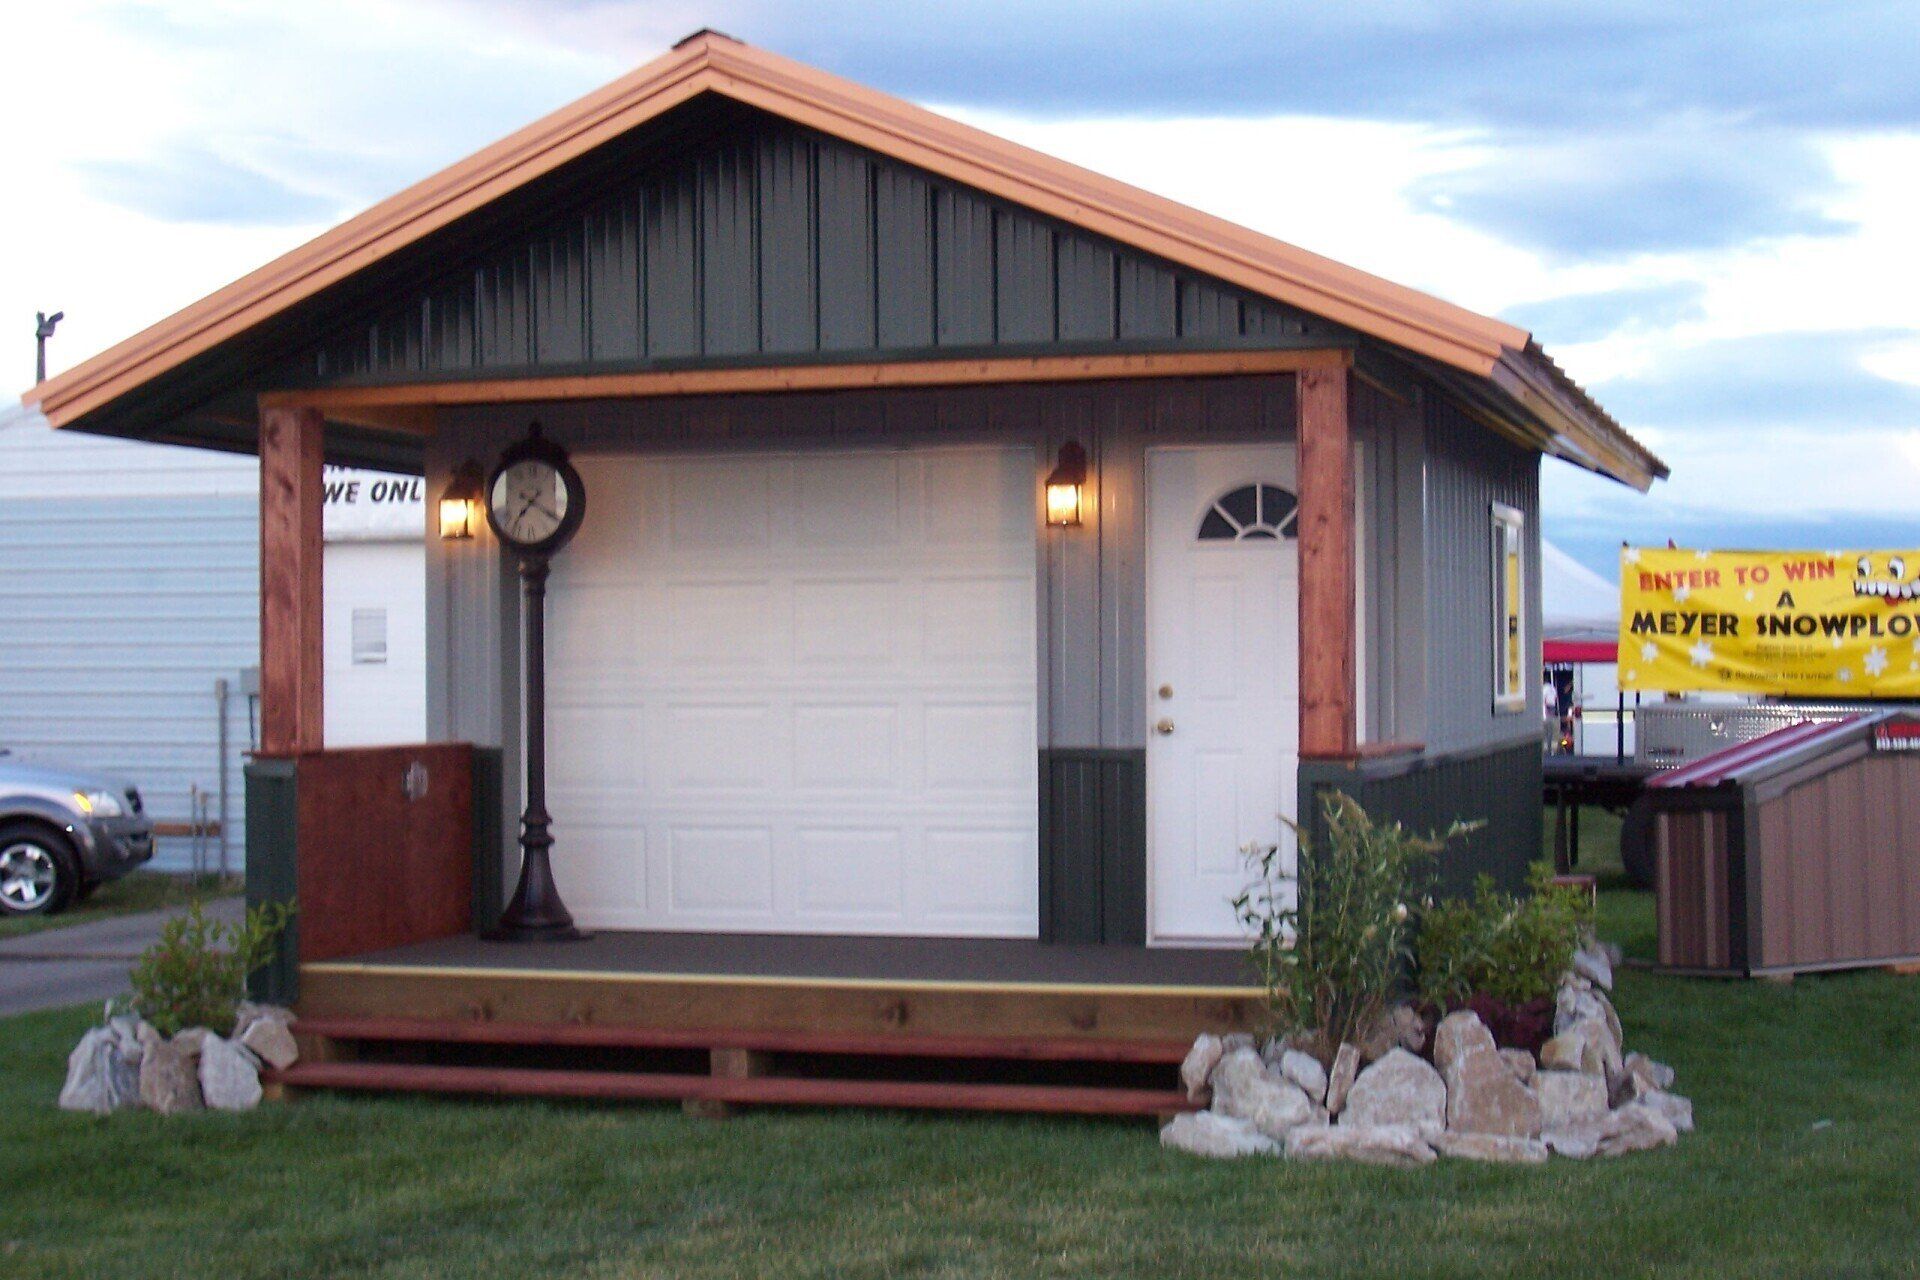 Cabin built by Superior Pole Buildings